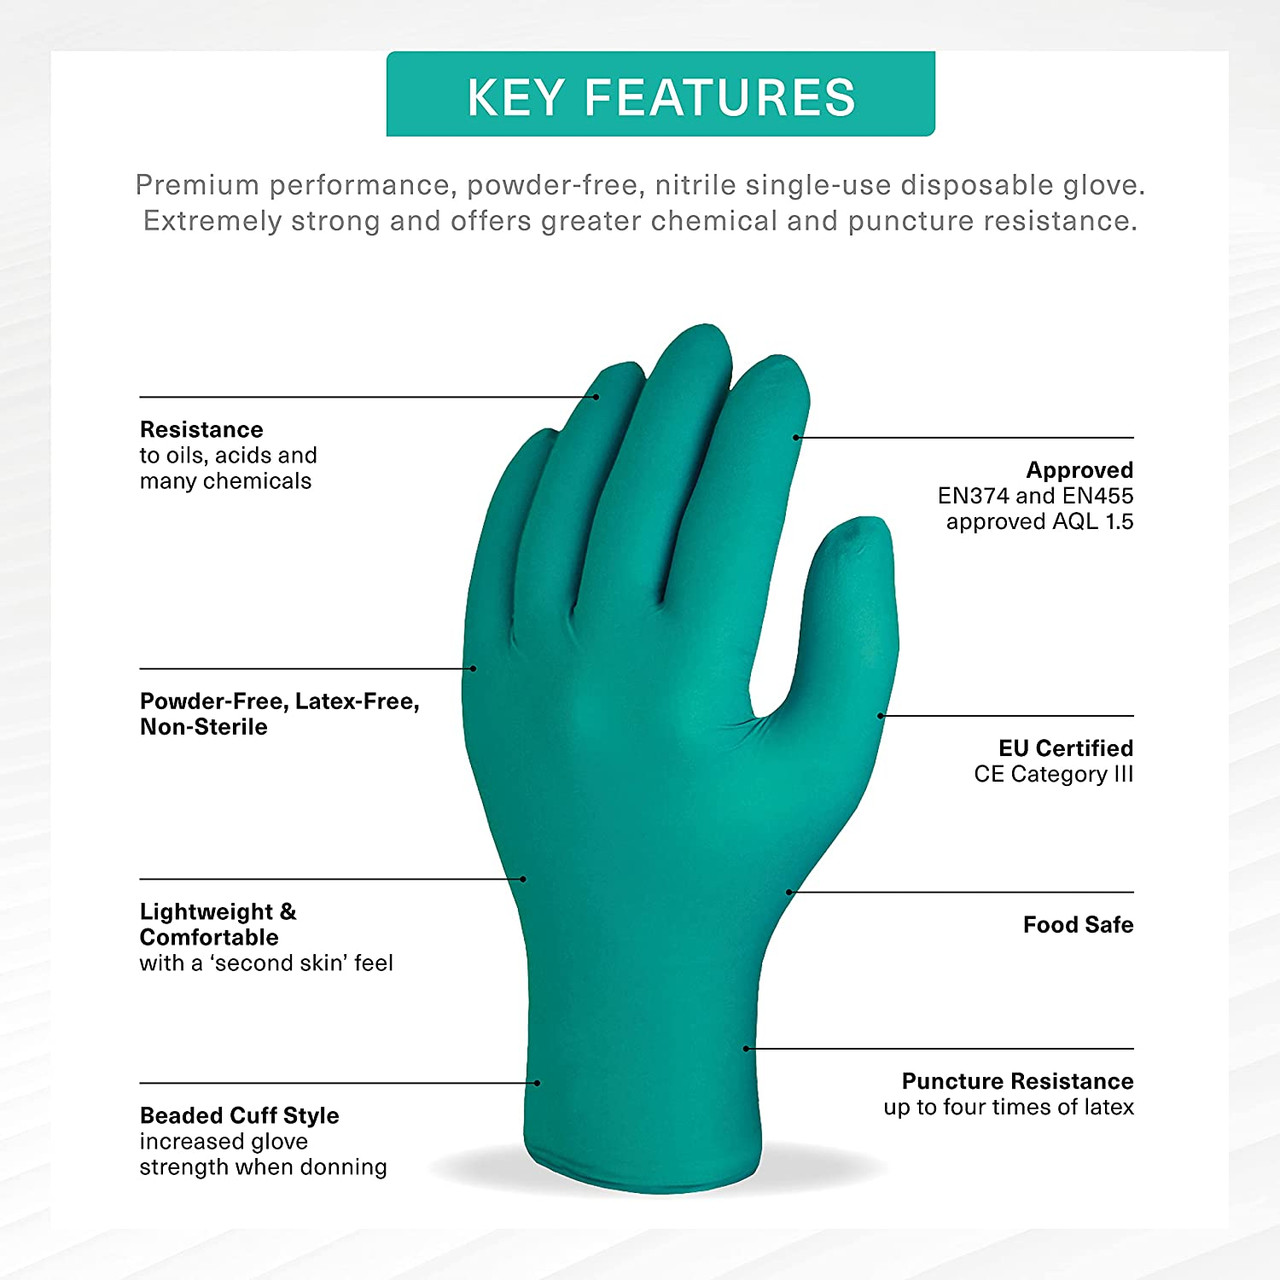 Skytec Teal Nitrile Gloves Box of 100 - Key Features